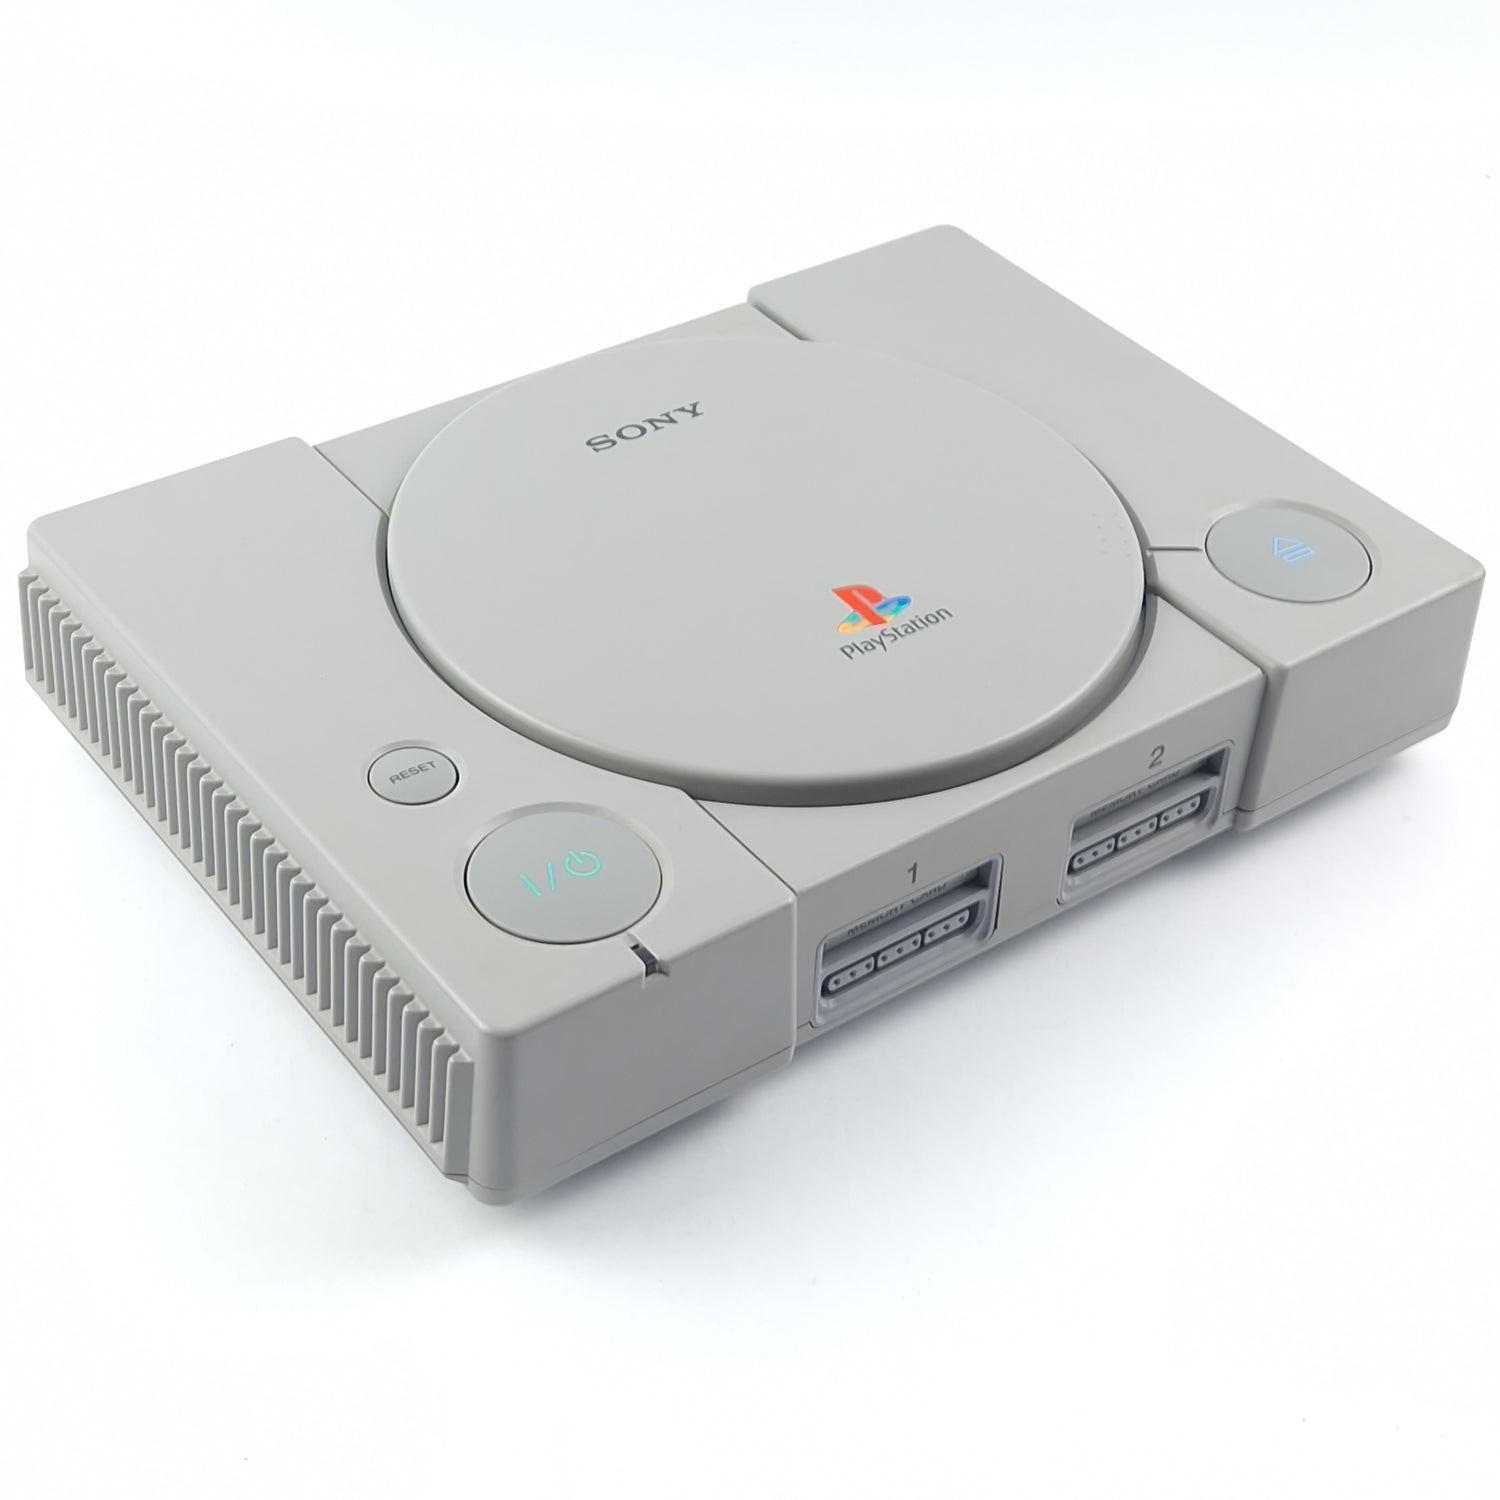 Playstation 1 console: with Namco gun, dual shock controller and cable - PS1